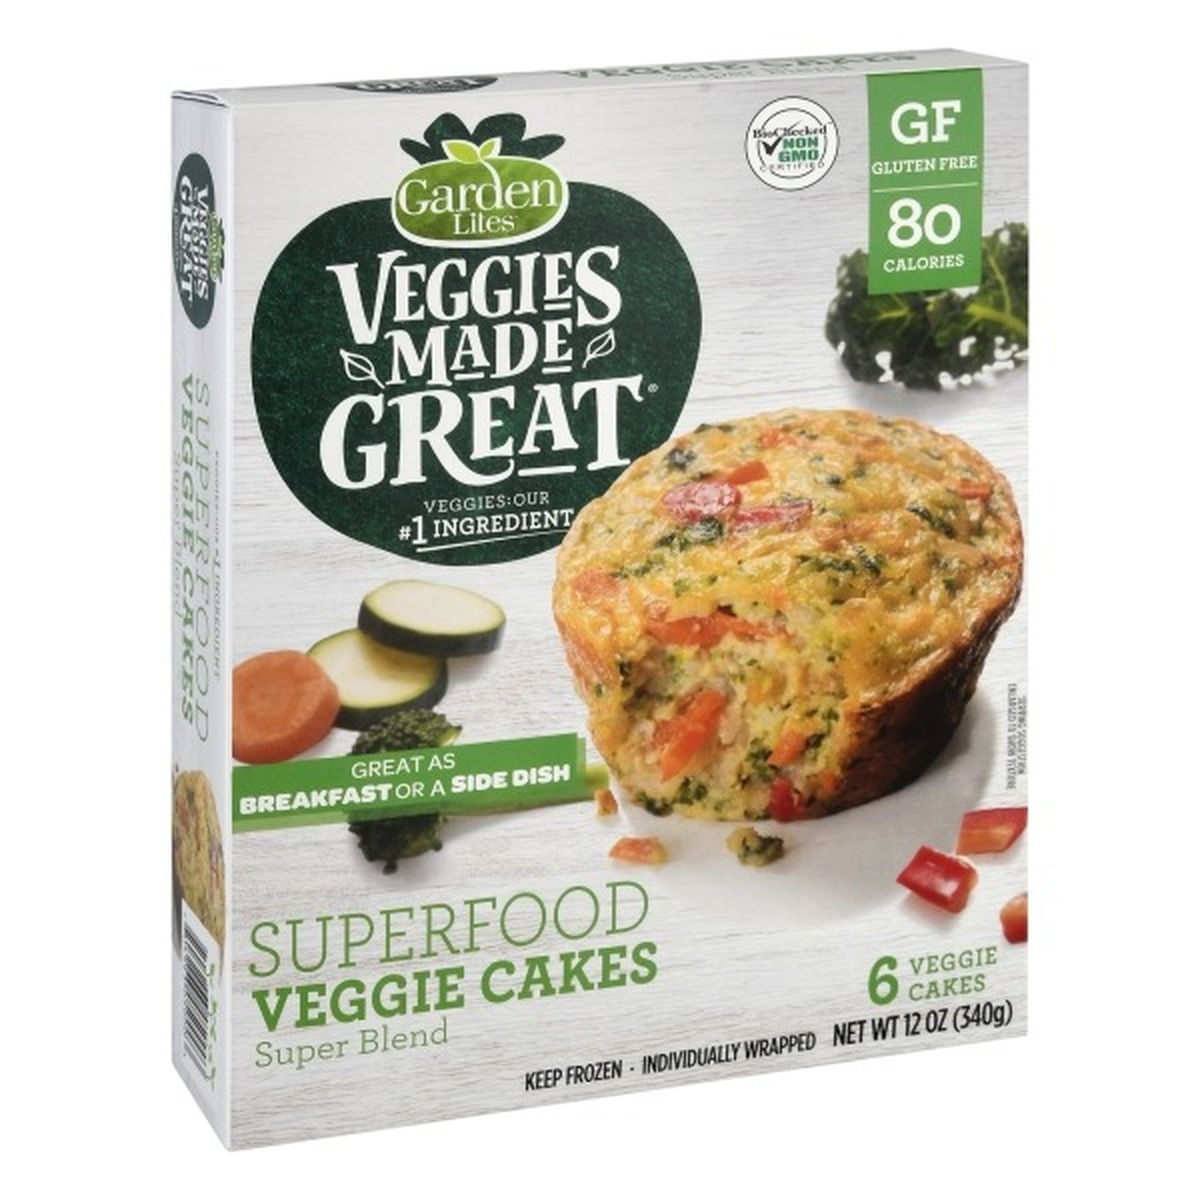 Calories in Veggies Made Great Veggie Cakes, Super Blend, Superfood